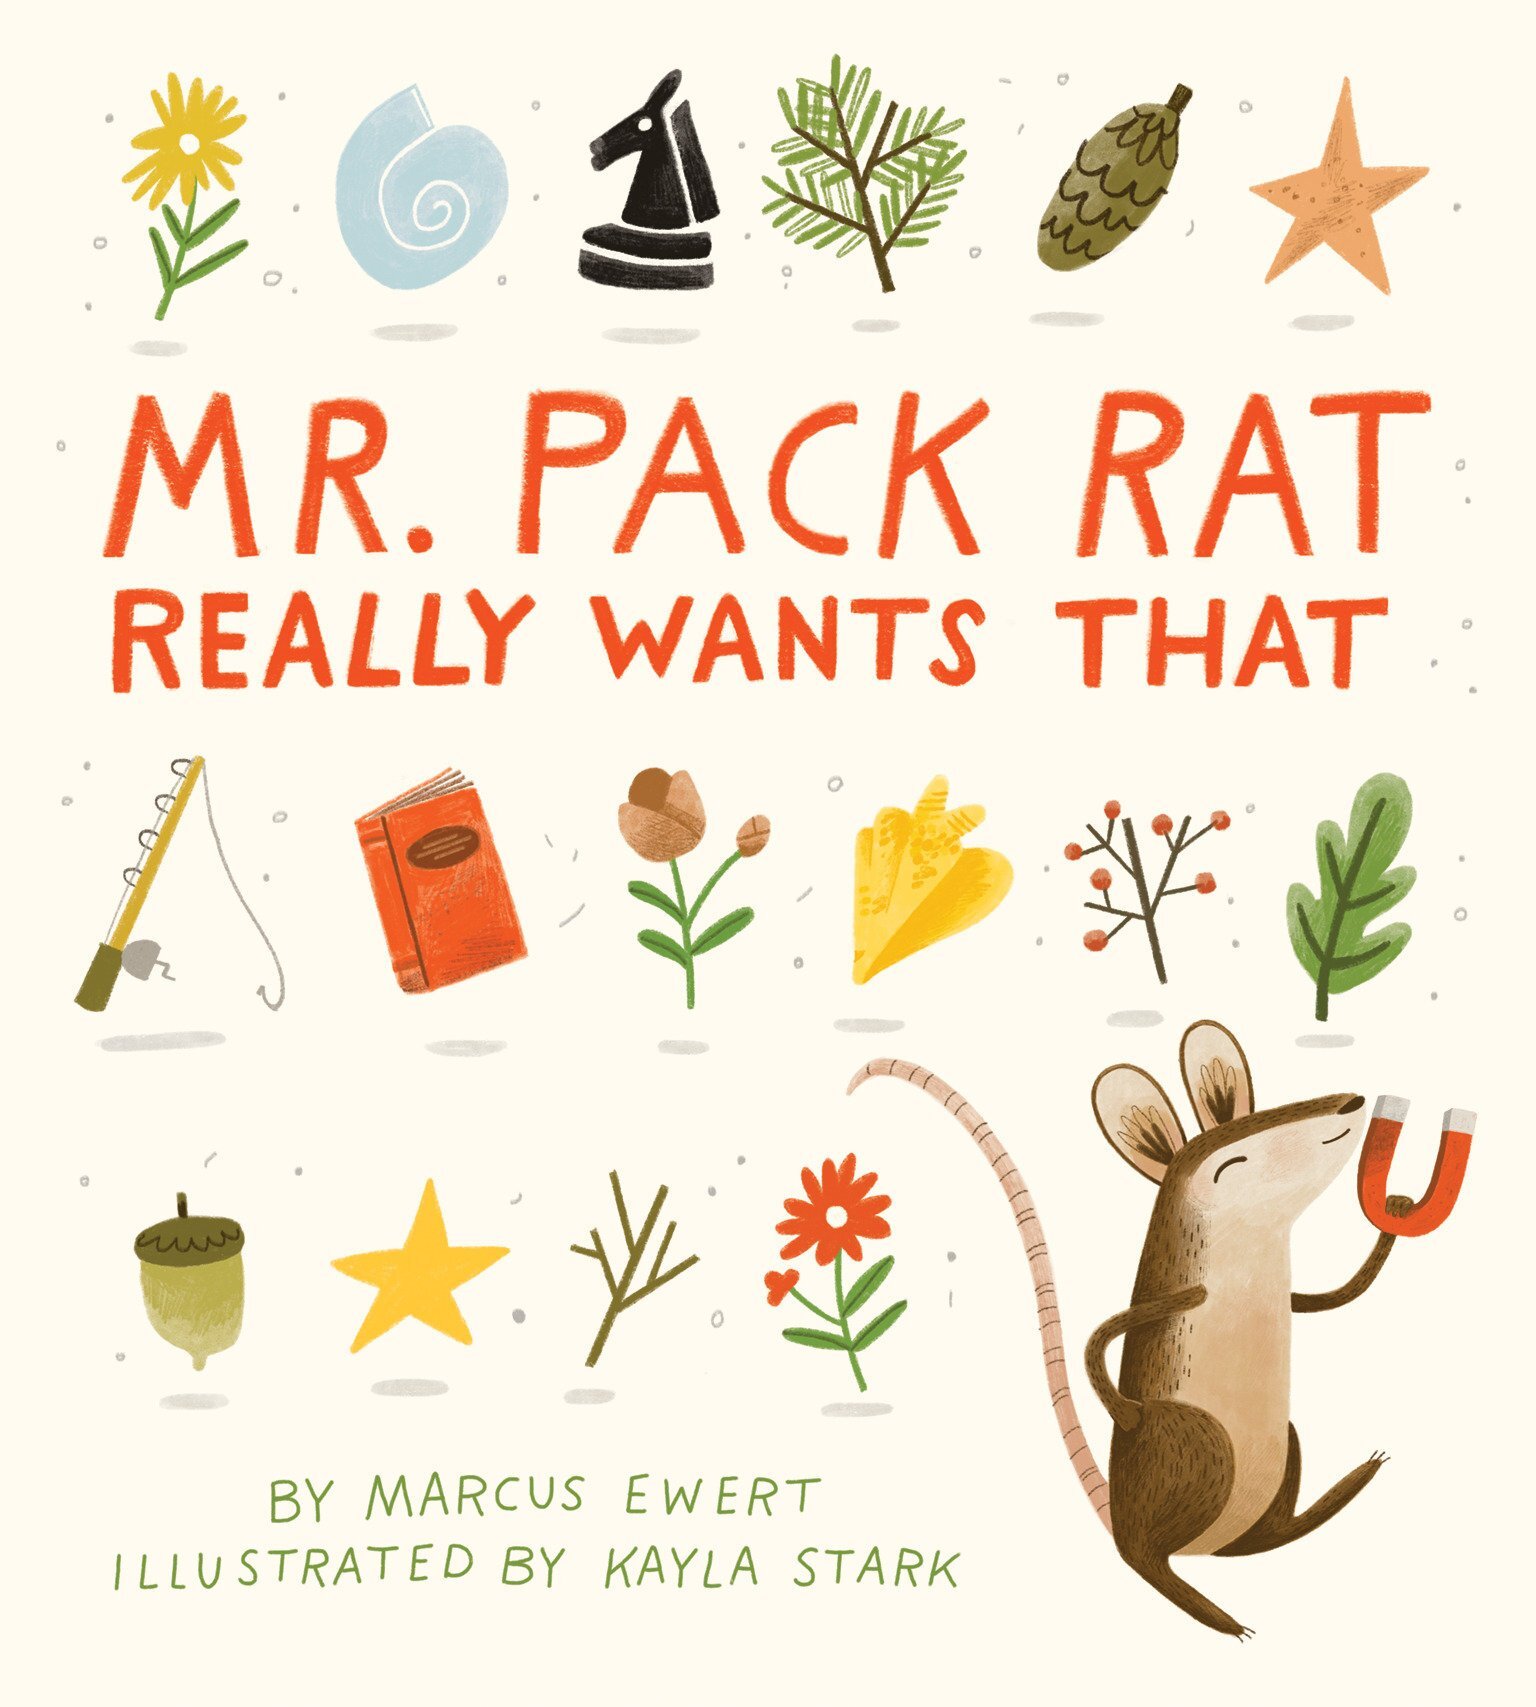 Mr. Pack Rat Really Wants That – Marcus Ewert (material things do not = happiness)